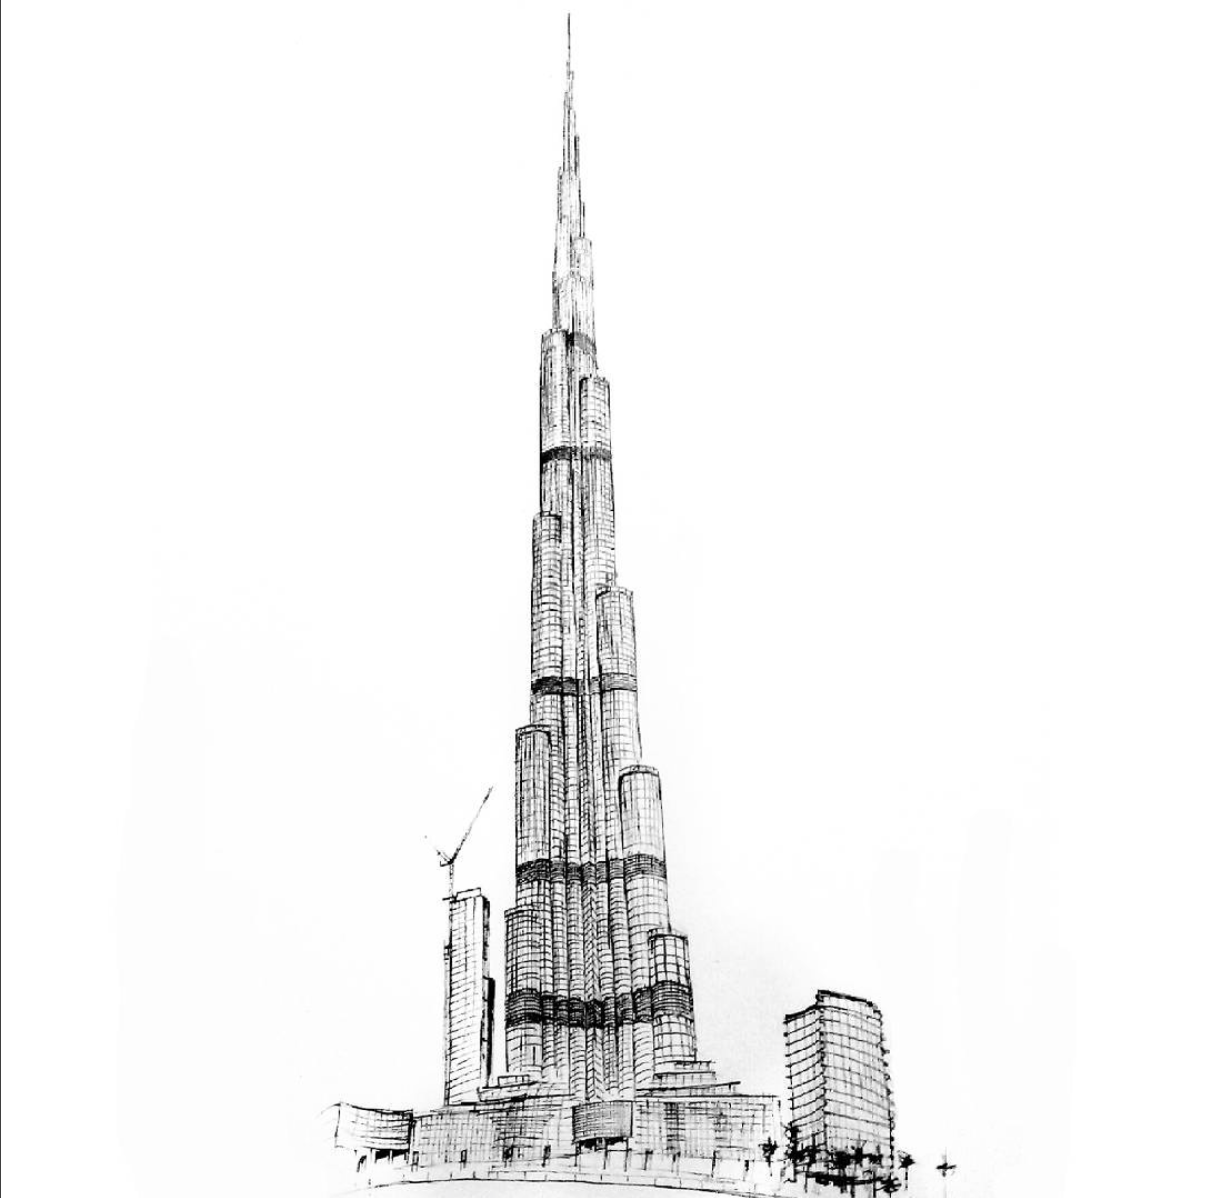 New How To Draw Burj Khalifa Sketch with simple drawing